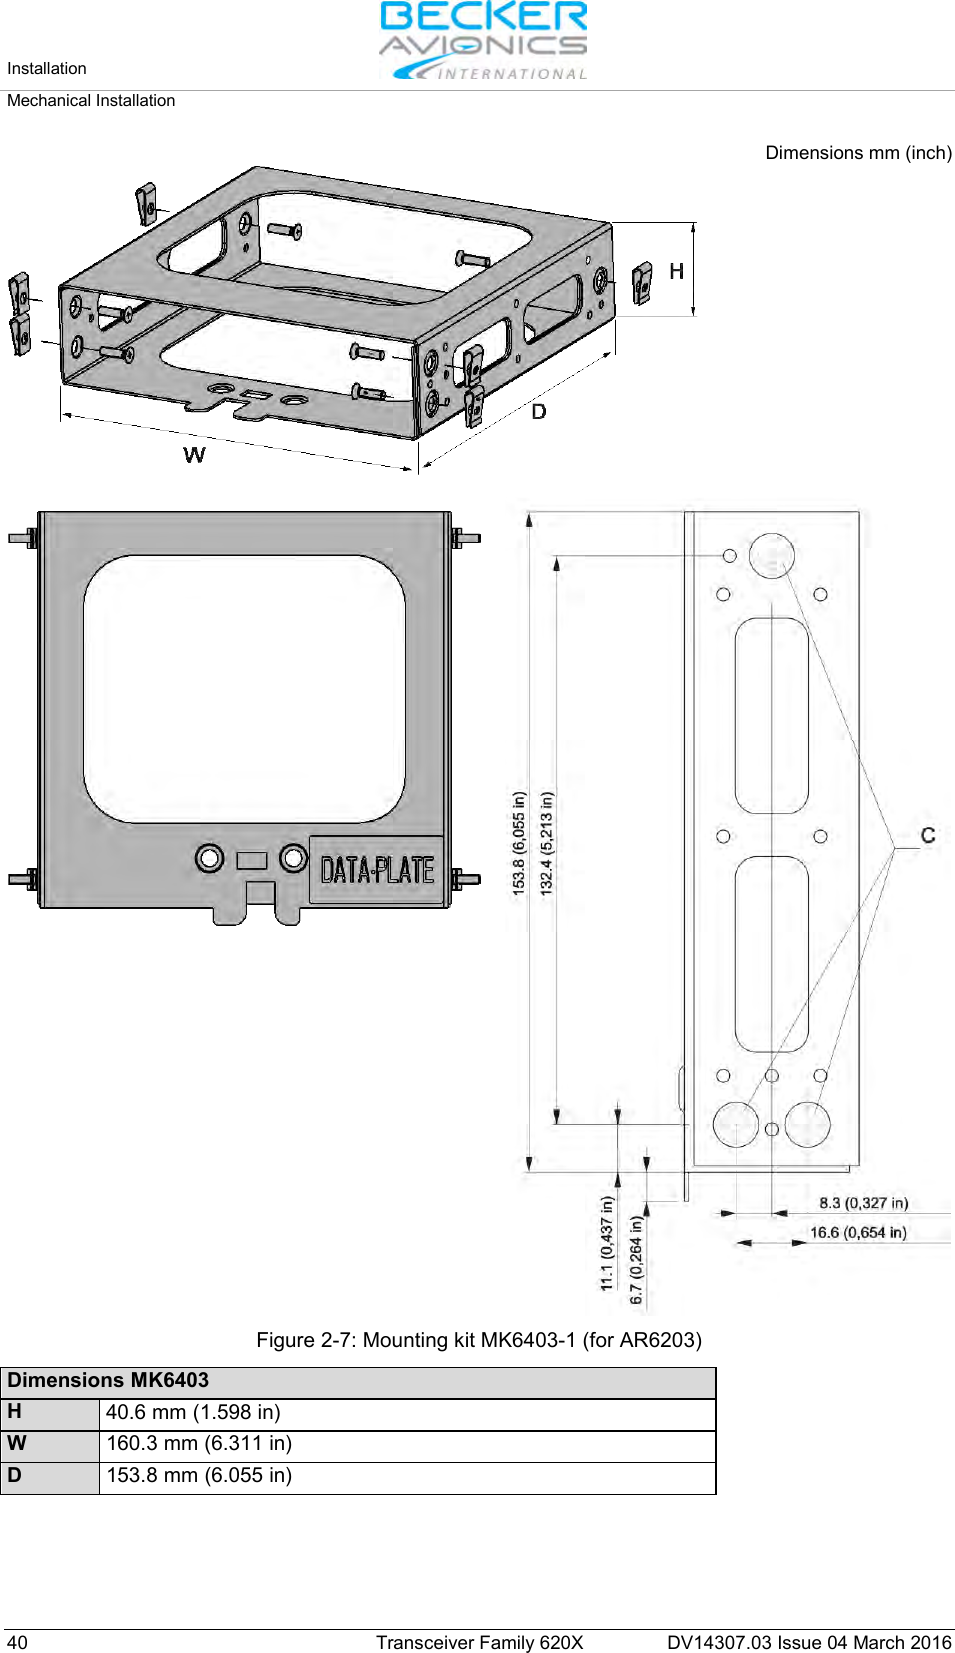 Installation   Mechanical Installation  40 Transceiver Family 620X DV14307.03 Issue 04 March 2016 Dimensions mm (inch)  Figure 2-7: Mounting kit MK6403-1 (for AR6203)  Dimensions MK6403 H 40.6 mm (1.598 in) W 160.3 mm (6.311 in) D 153.8 mm (6.055 in)    